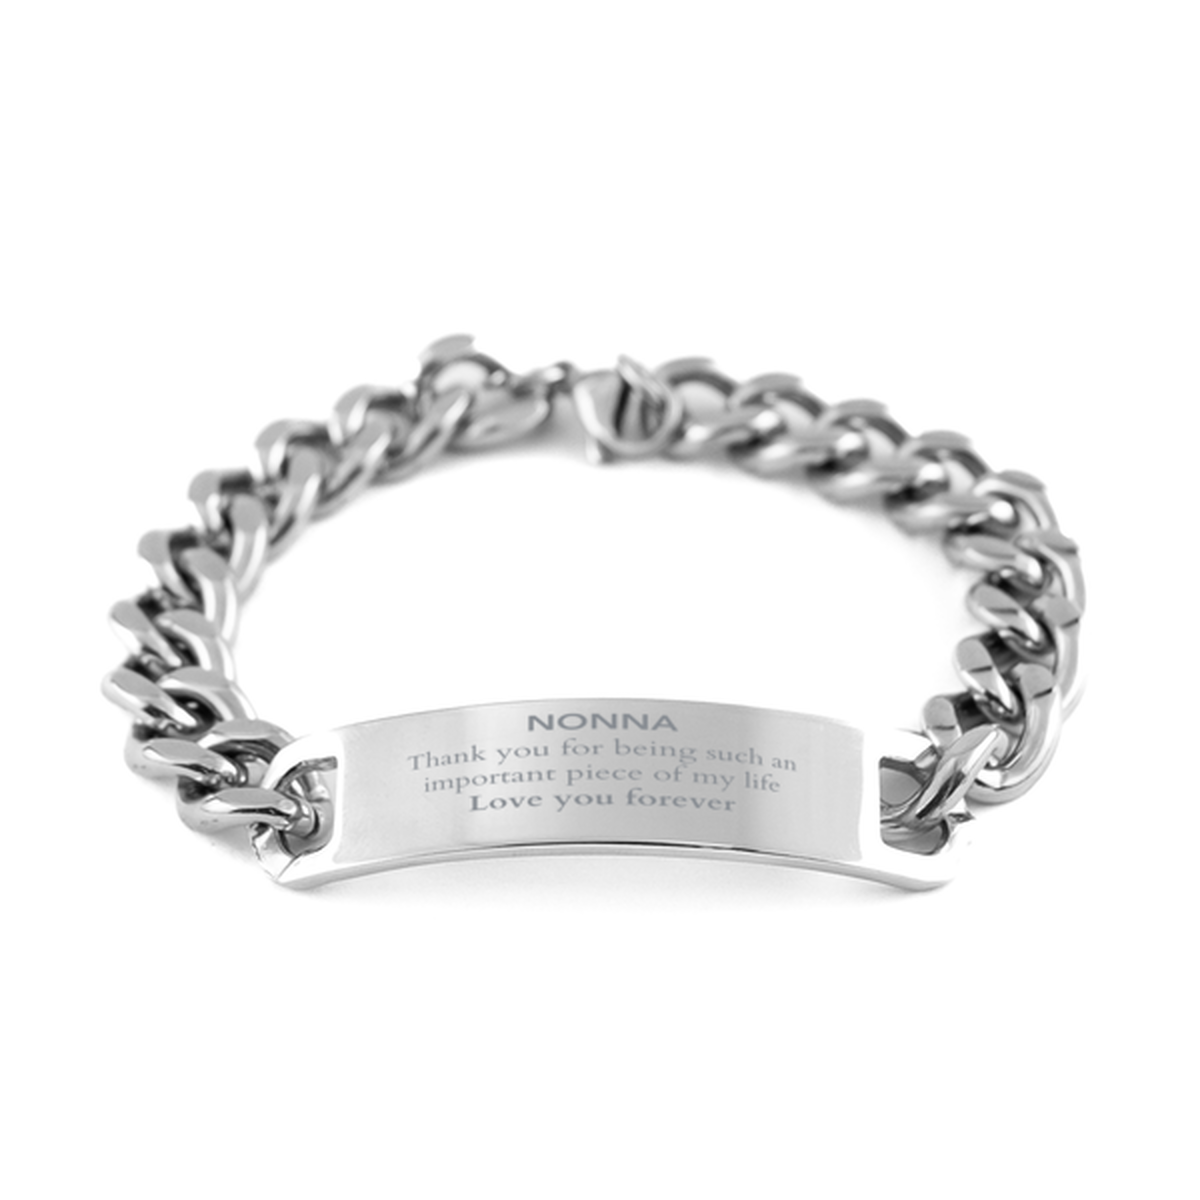 Appropriate Nonna Cuban Chain Stainless Steel Bracelet Epic Birthday Gifts for Nonna Thank you for being such an important piece of my life Nonna Christmas Mothers Fathers Day